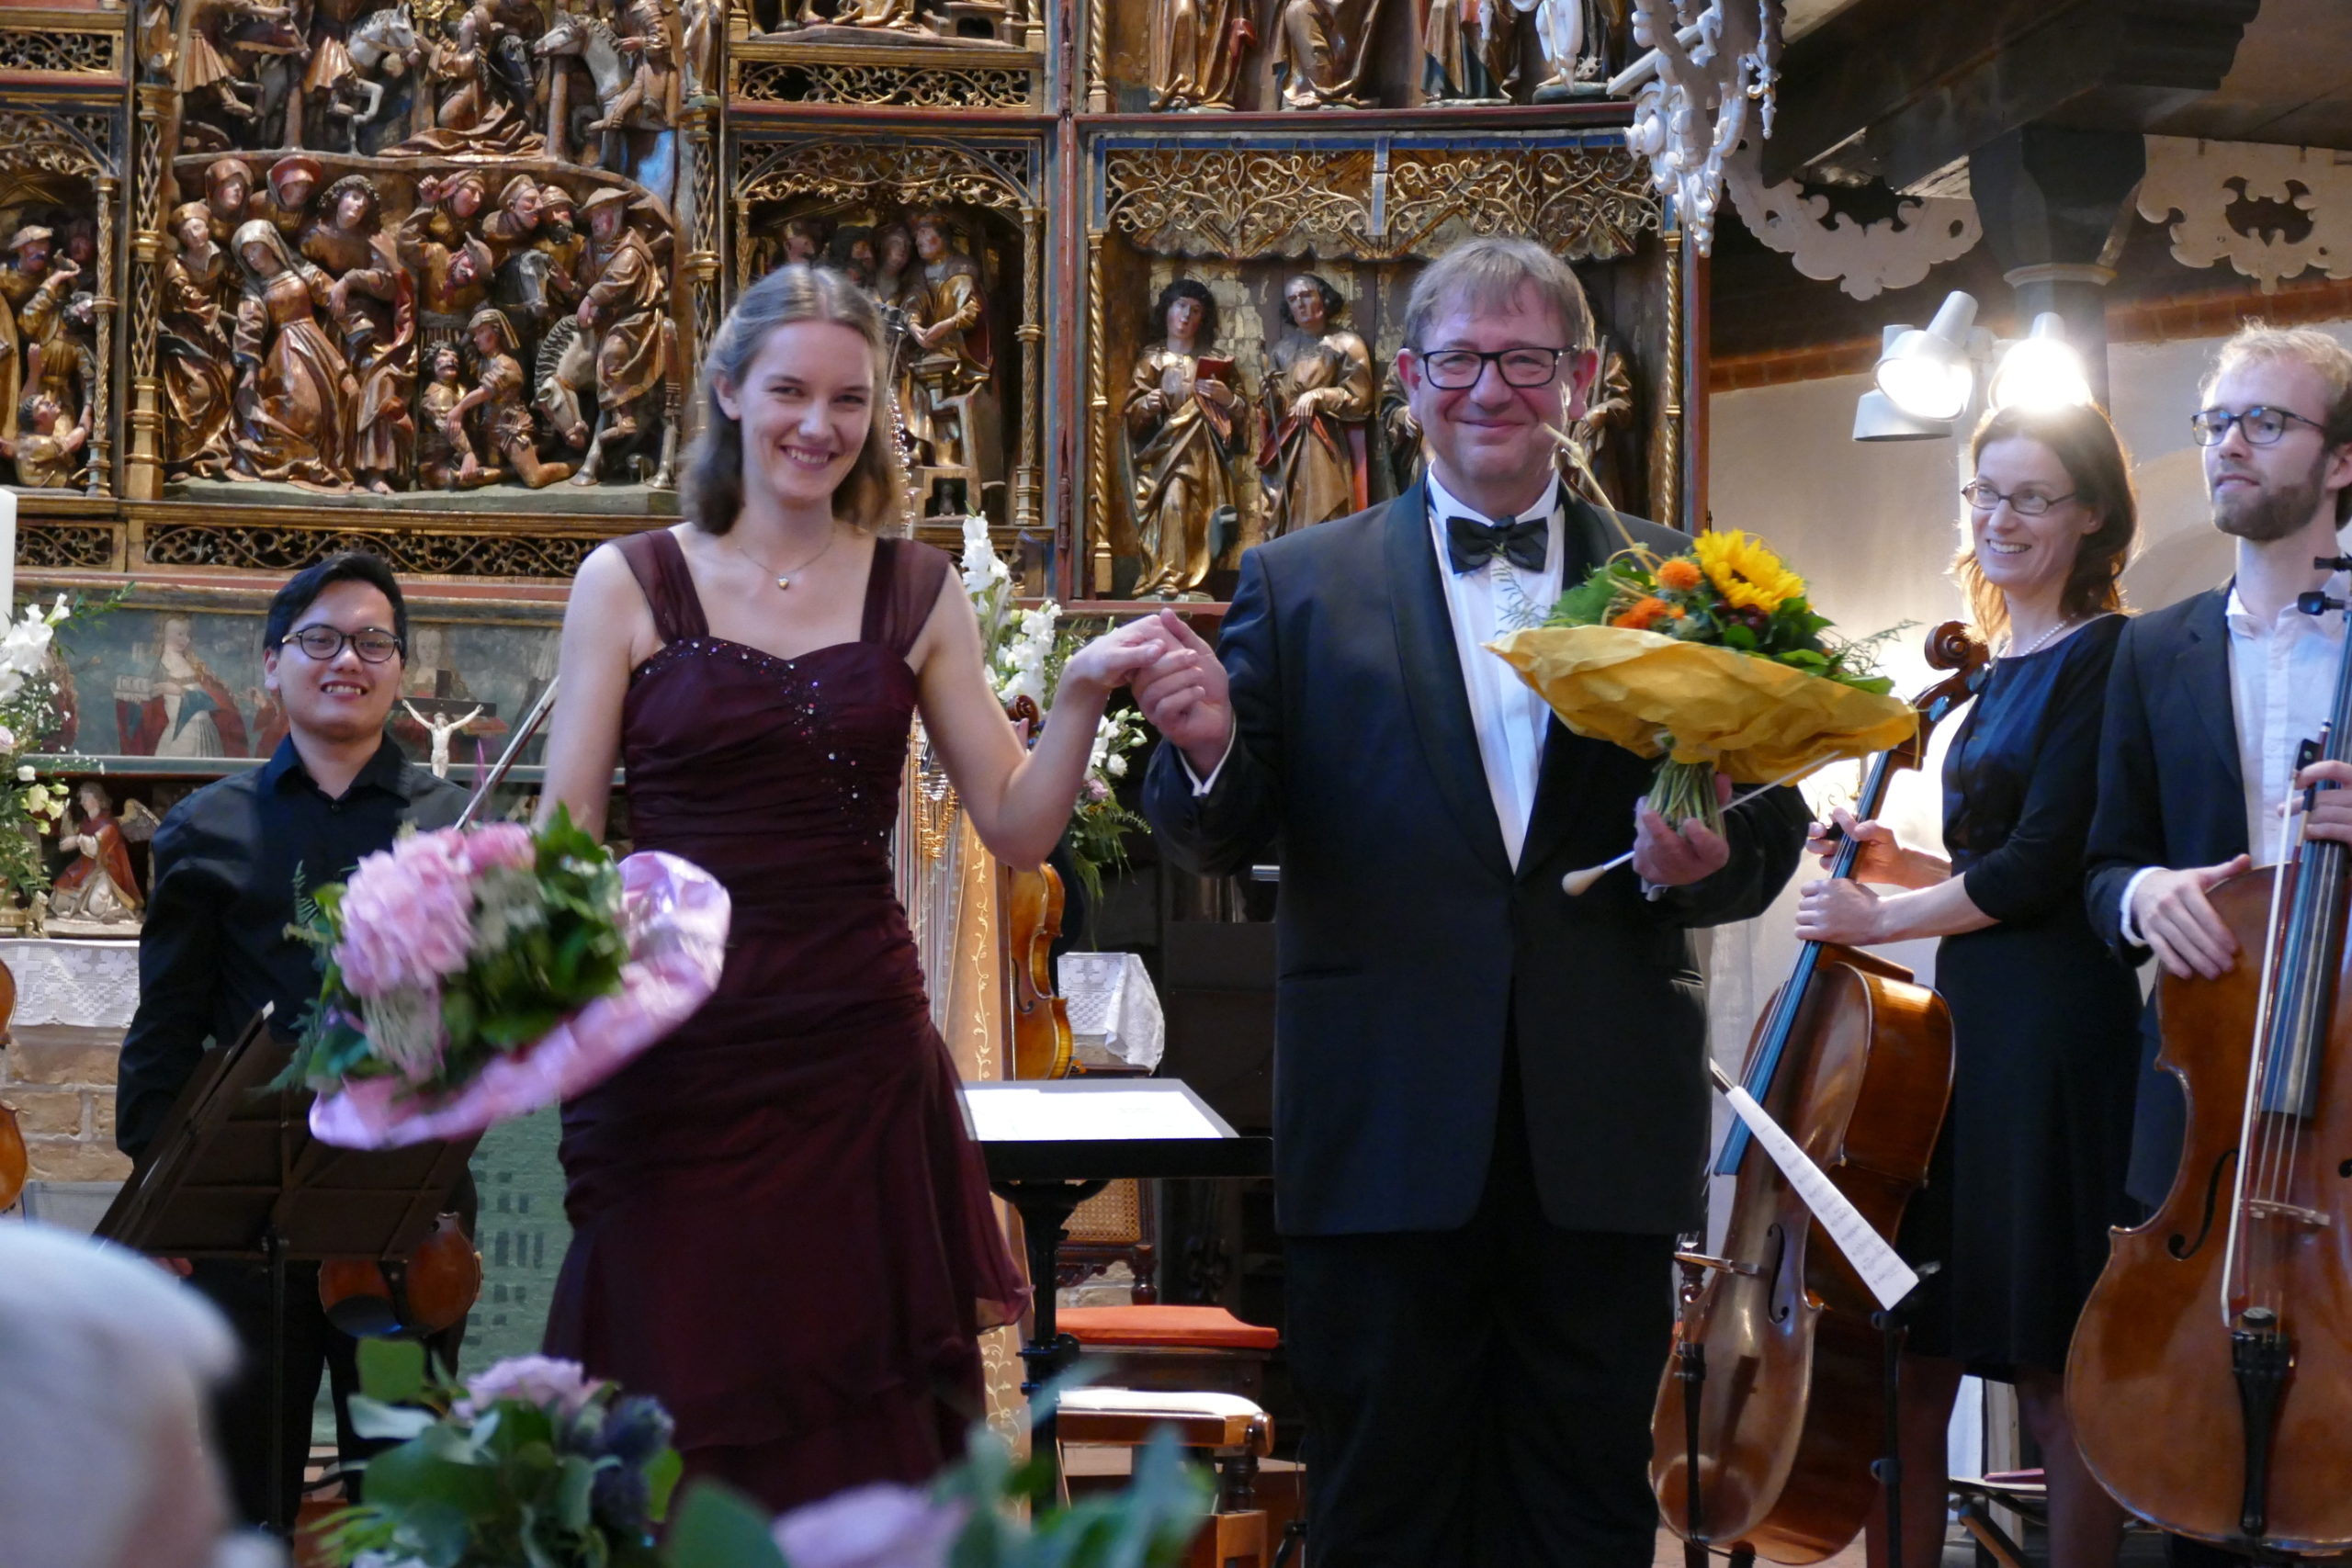 Handel Concert with the Lüneburger Chamber Orchestra conducted by Urs-Michael Theus at Lüne Monastery 2016